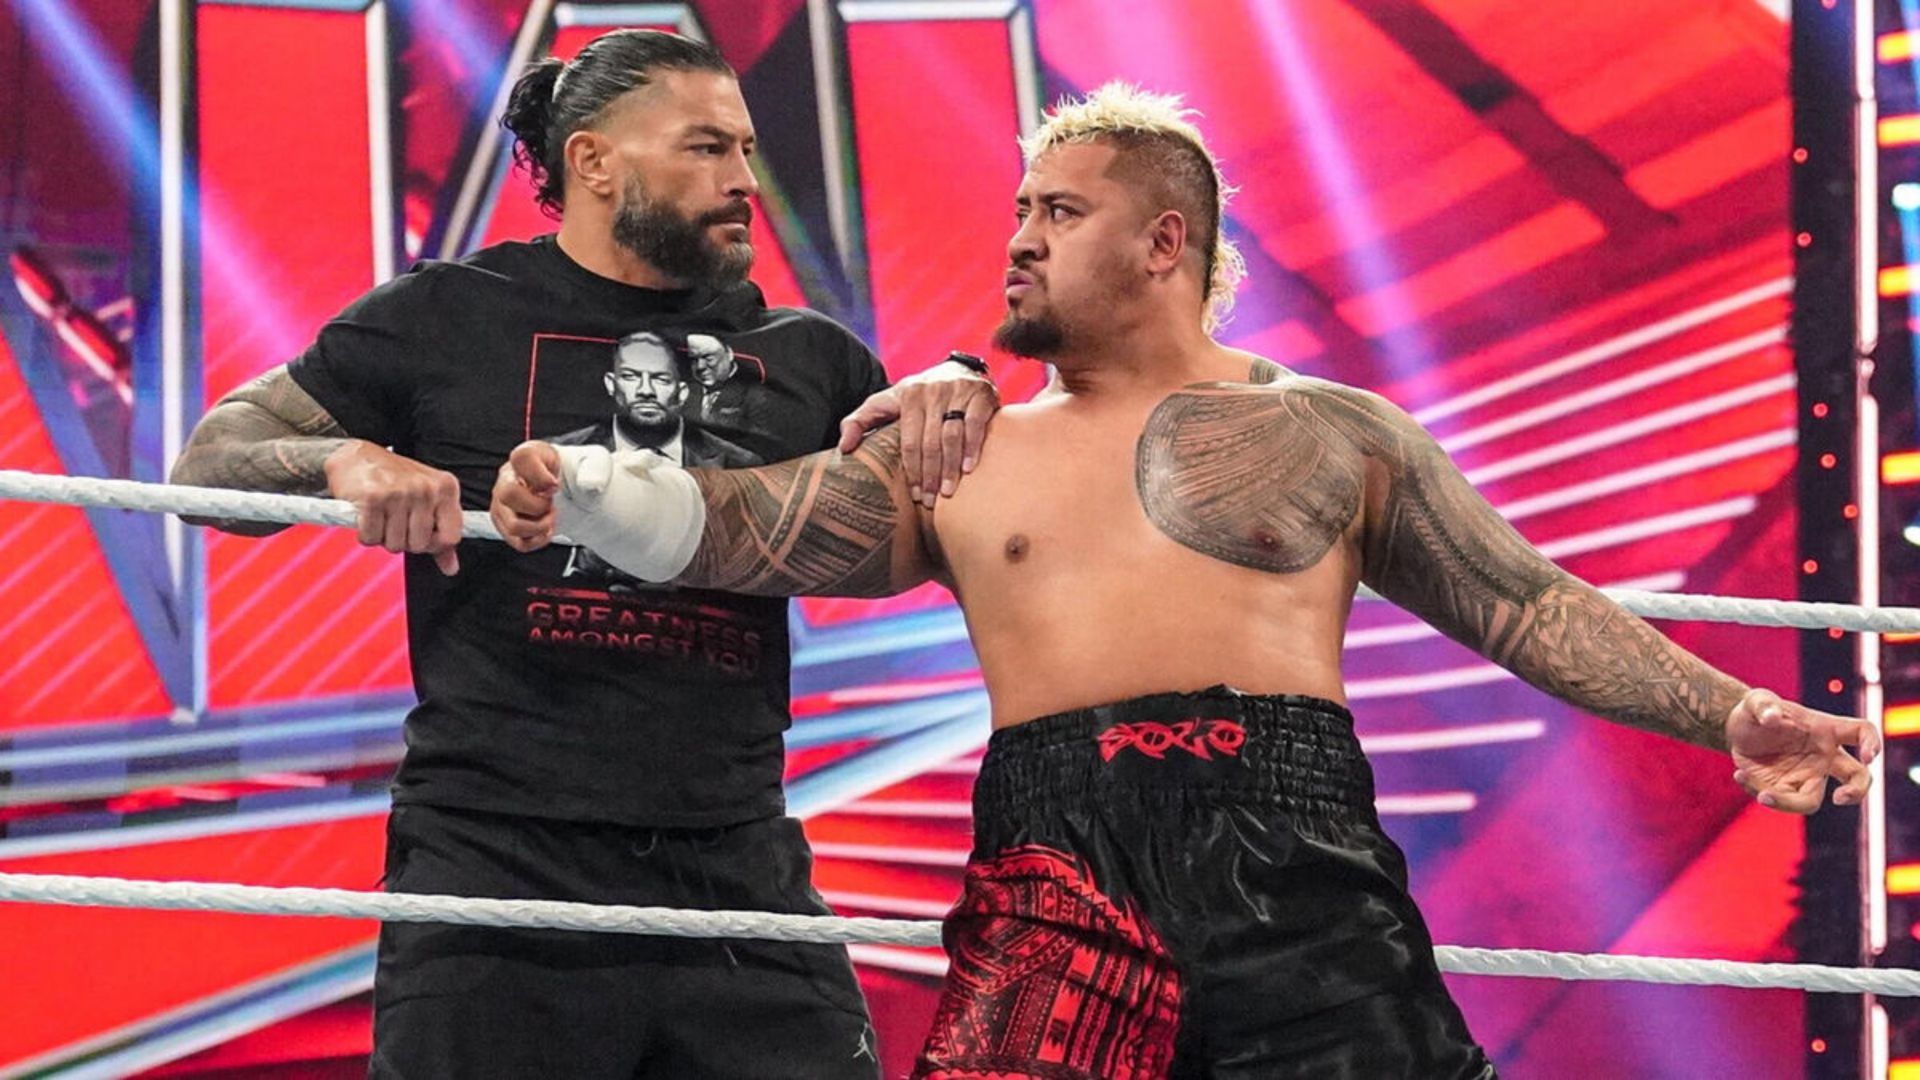 Former Undisputed WWE Universal Champion Roman Reigns and Solo Sikoa